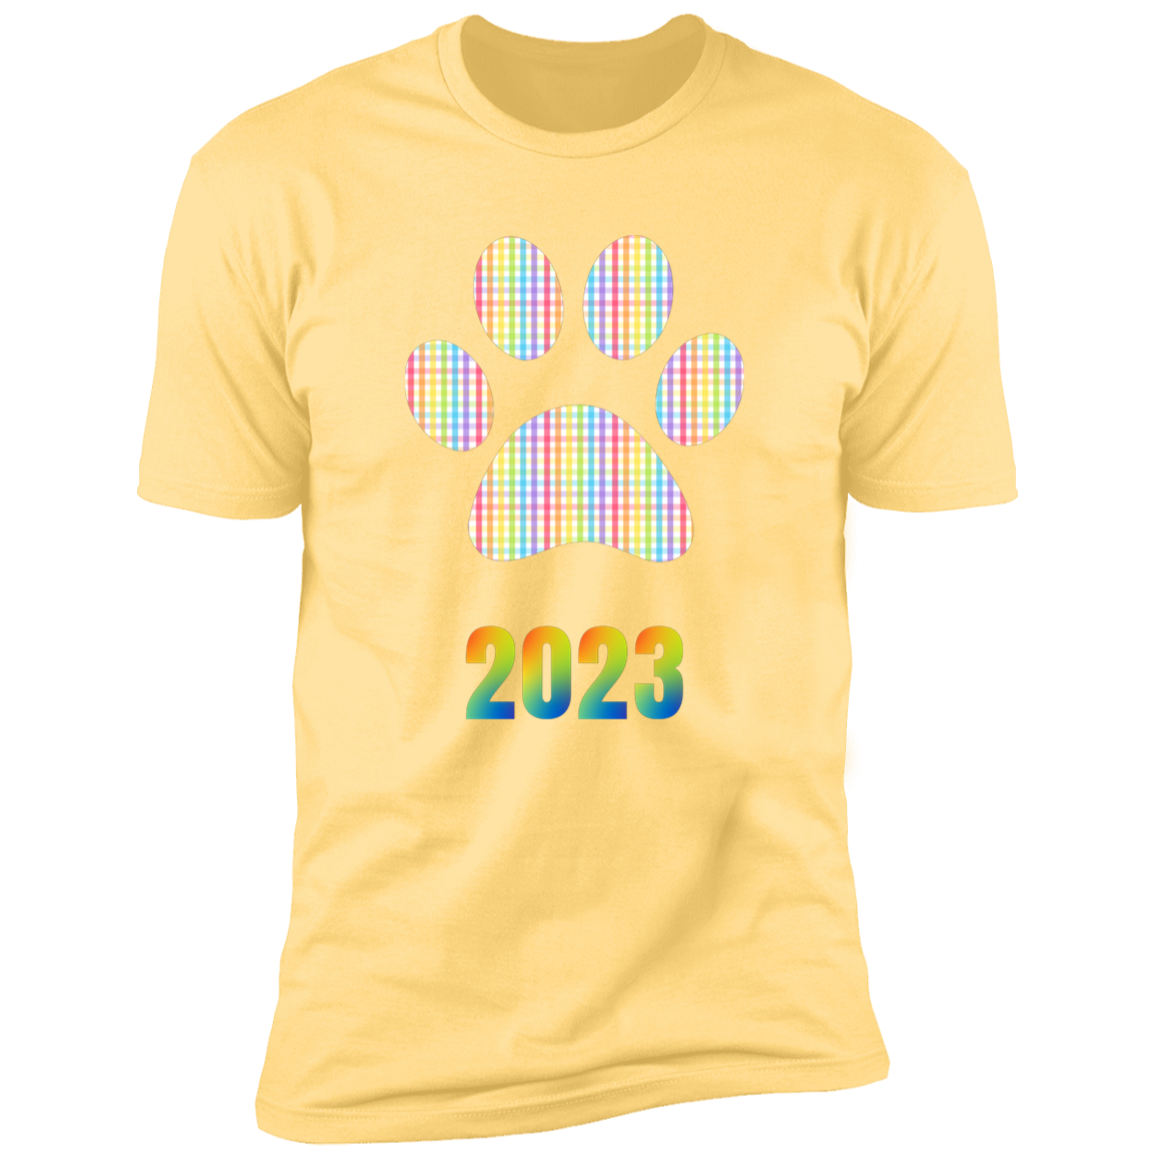 Pride Paw 2023 (Gingham) Pride T-shirt, Paw Pride Dog Shirt for humans, in banana cream